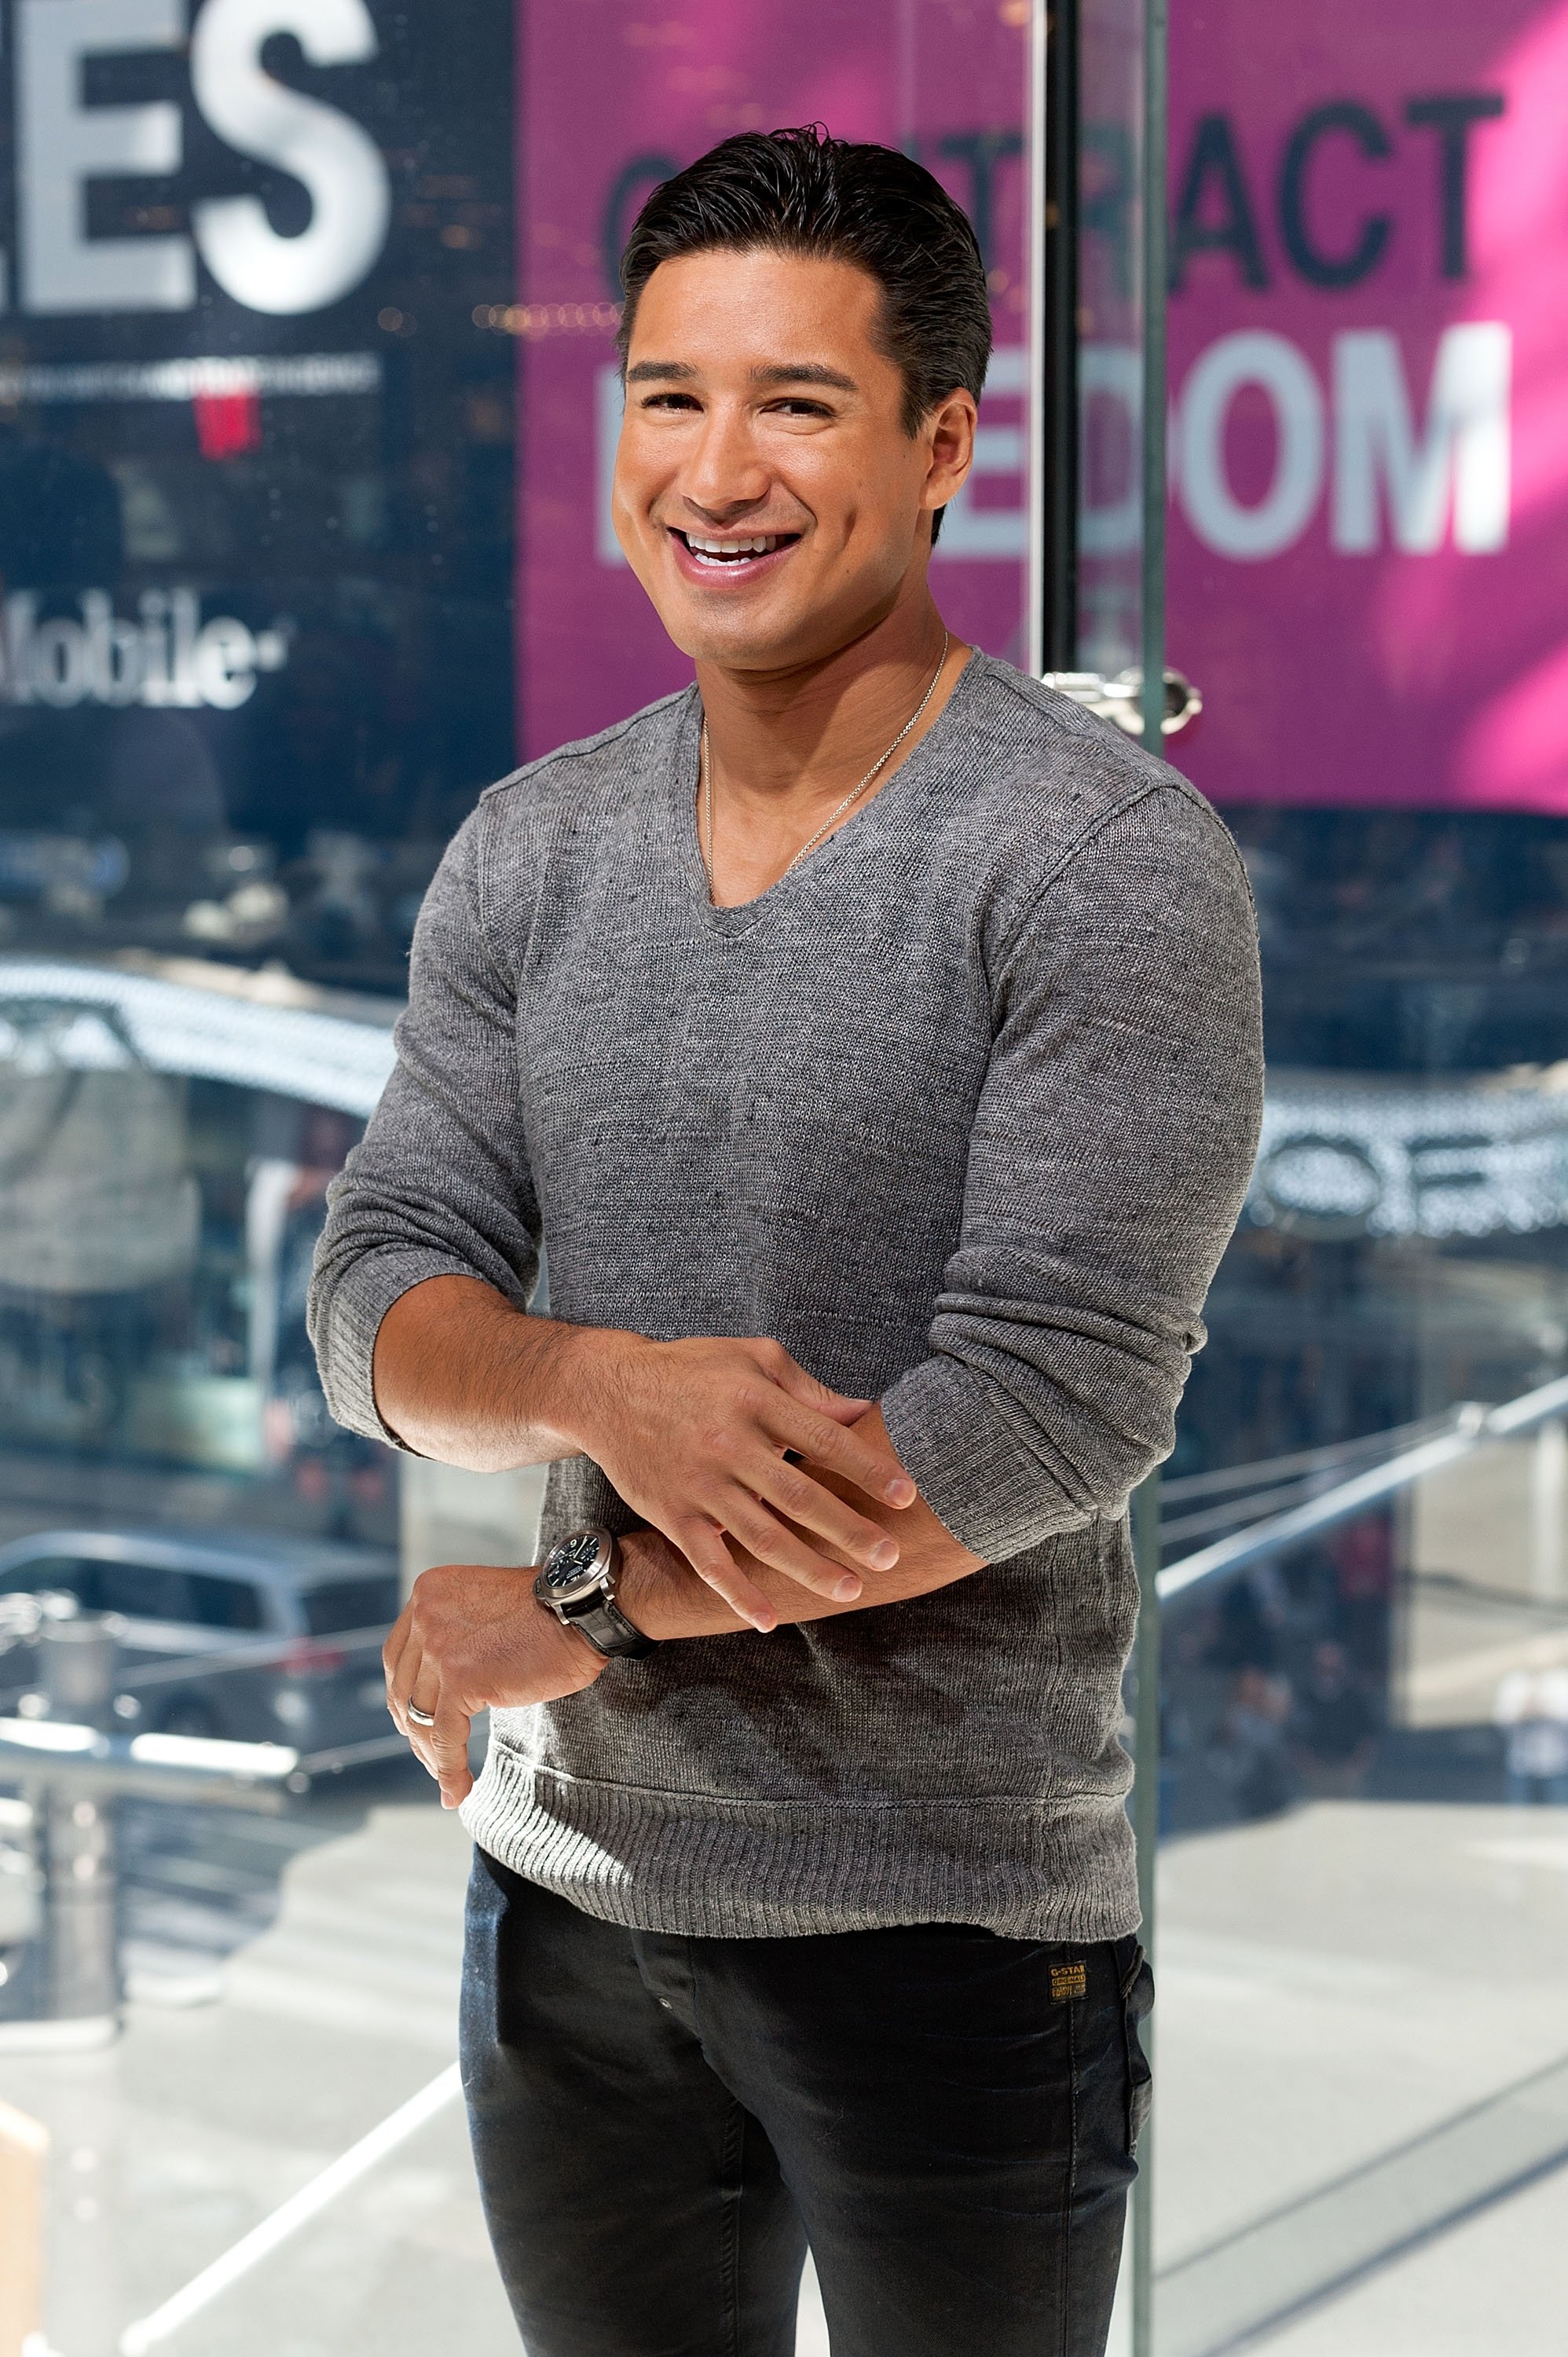 Mario Lopez hosts "Extra" in Times Square on October 6, 2014, in New York City. | Source: Getty Images.